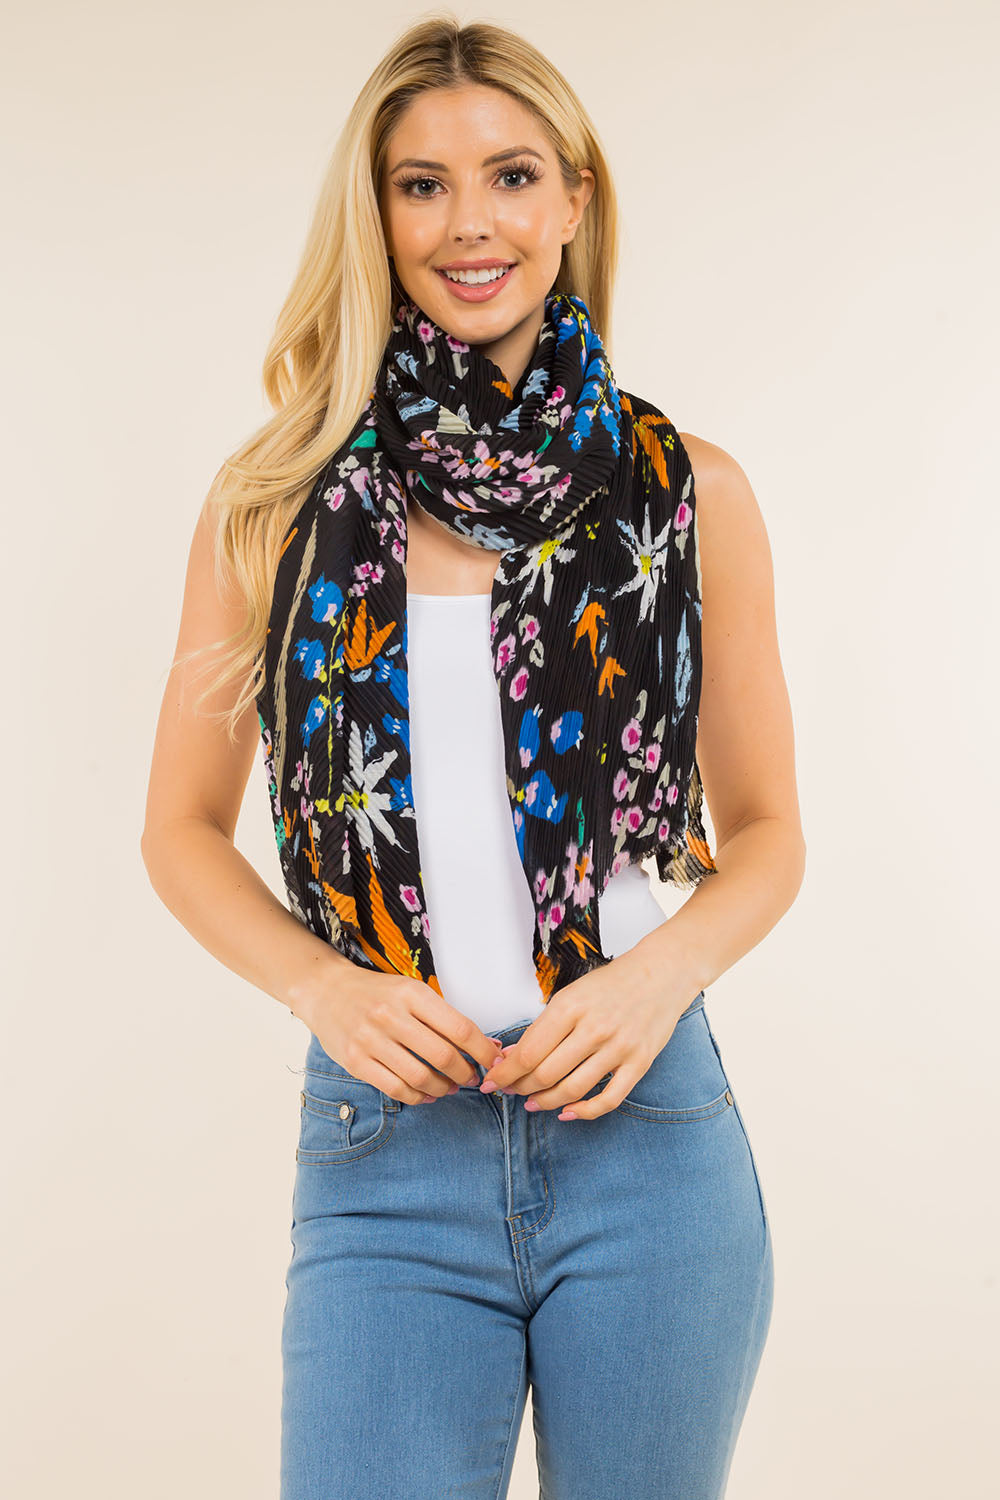 GPO-4131 colorful floral design scarf